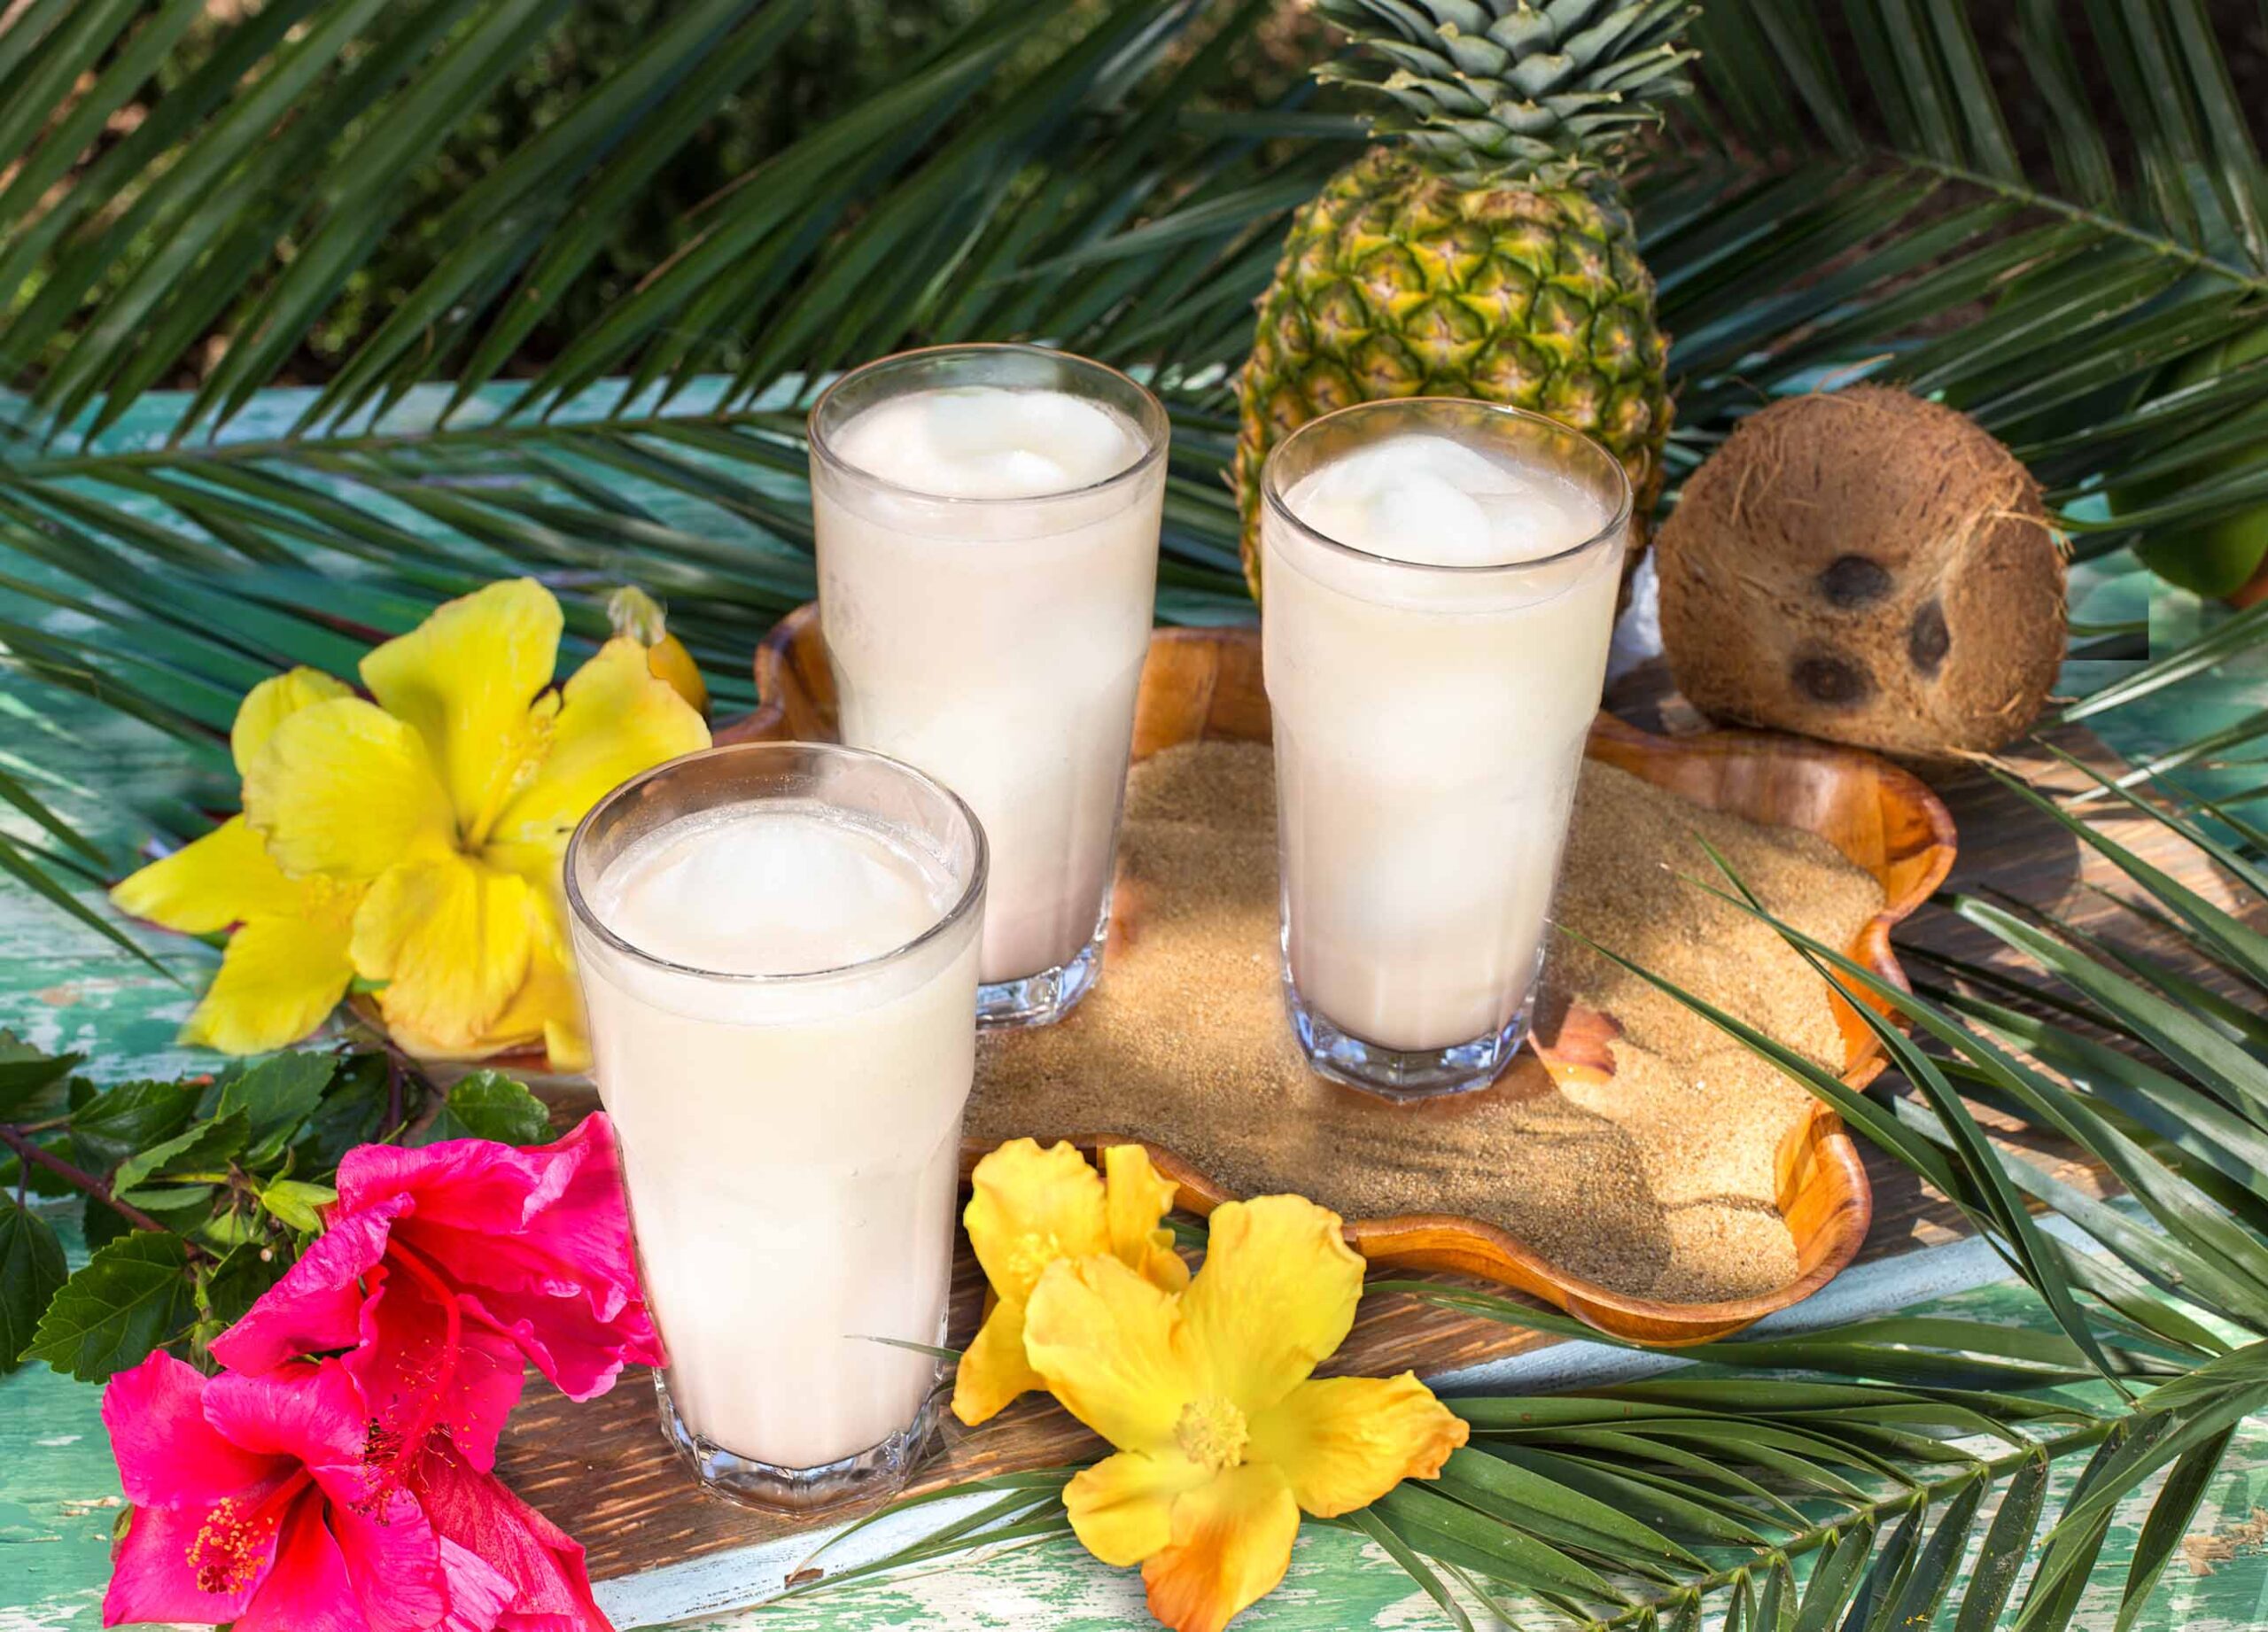 Three of our new monthly special Swirl drinks with a tropical table setting